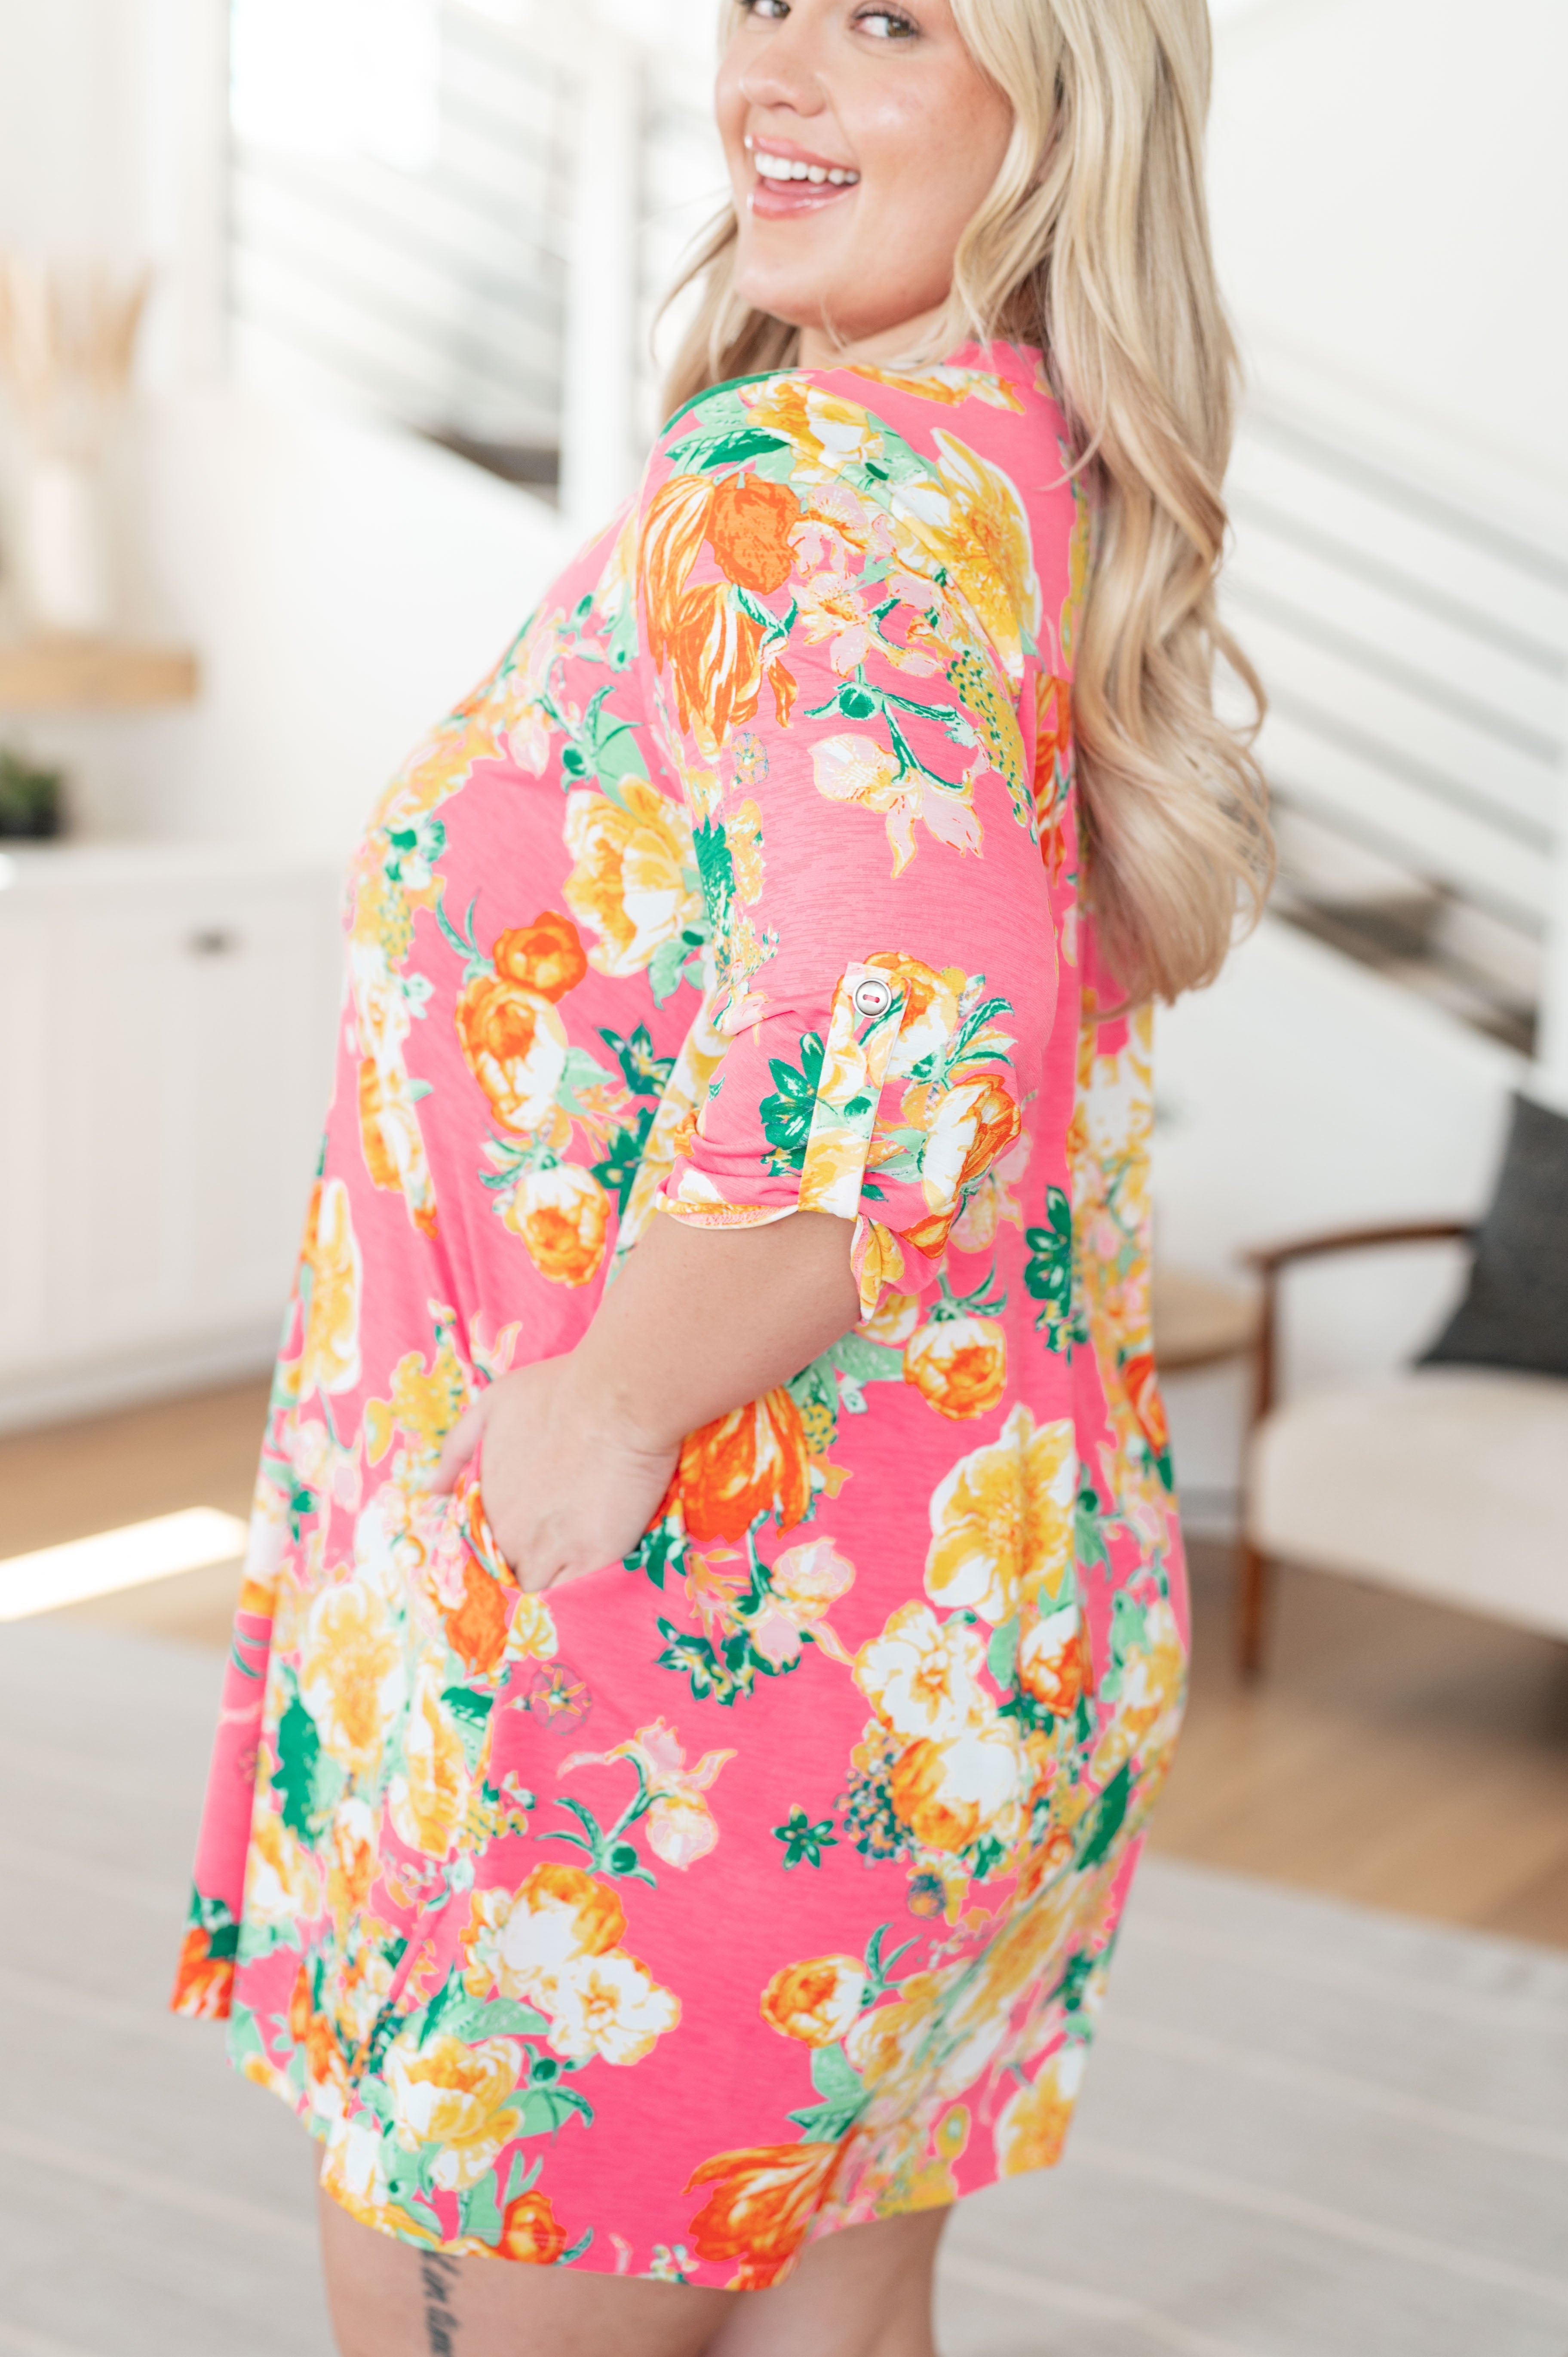 Lizzy Dress in Hot Pink and Yellow Floral Dresses Ave Shops   